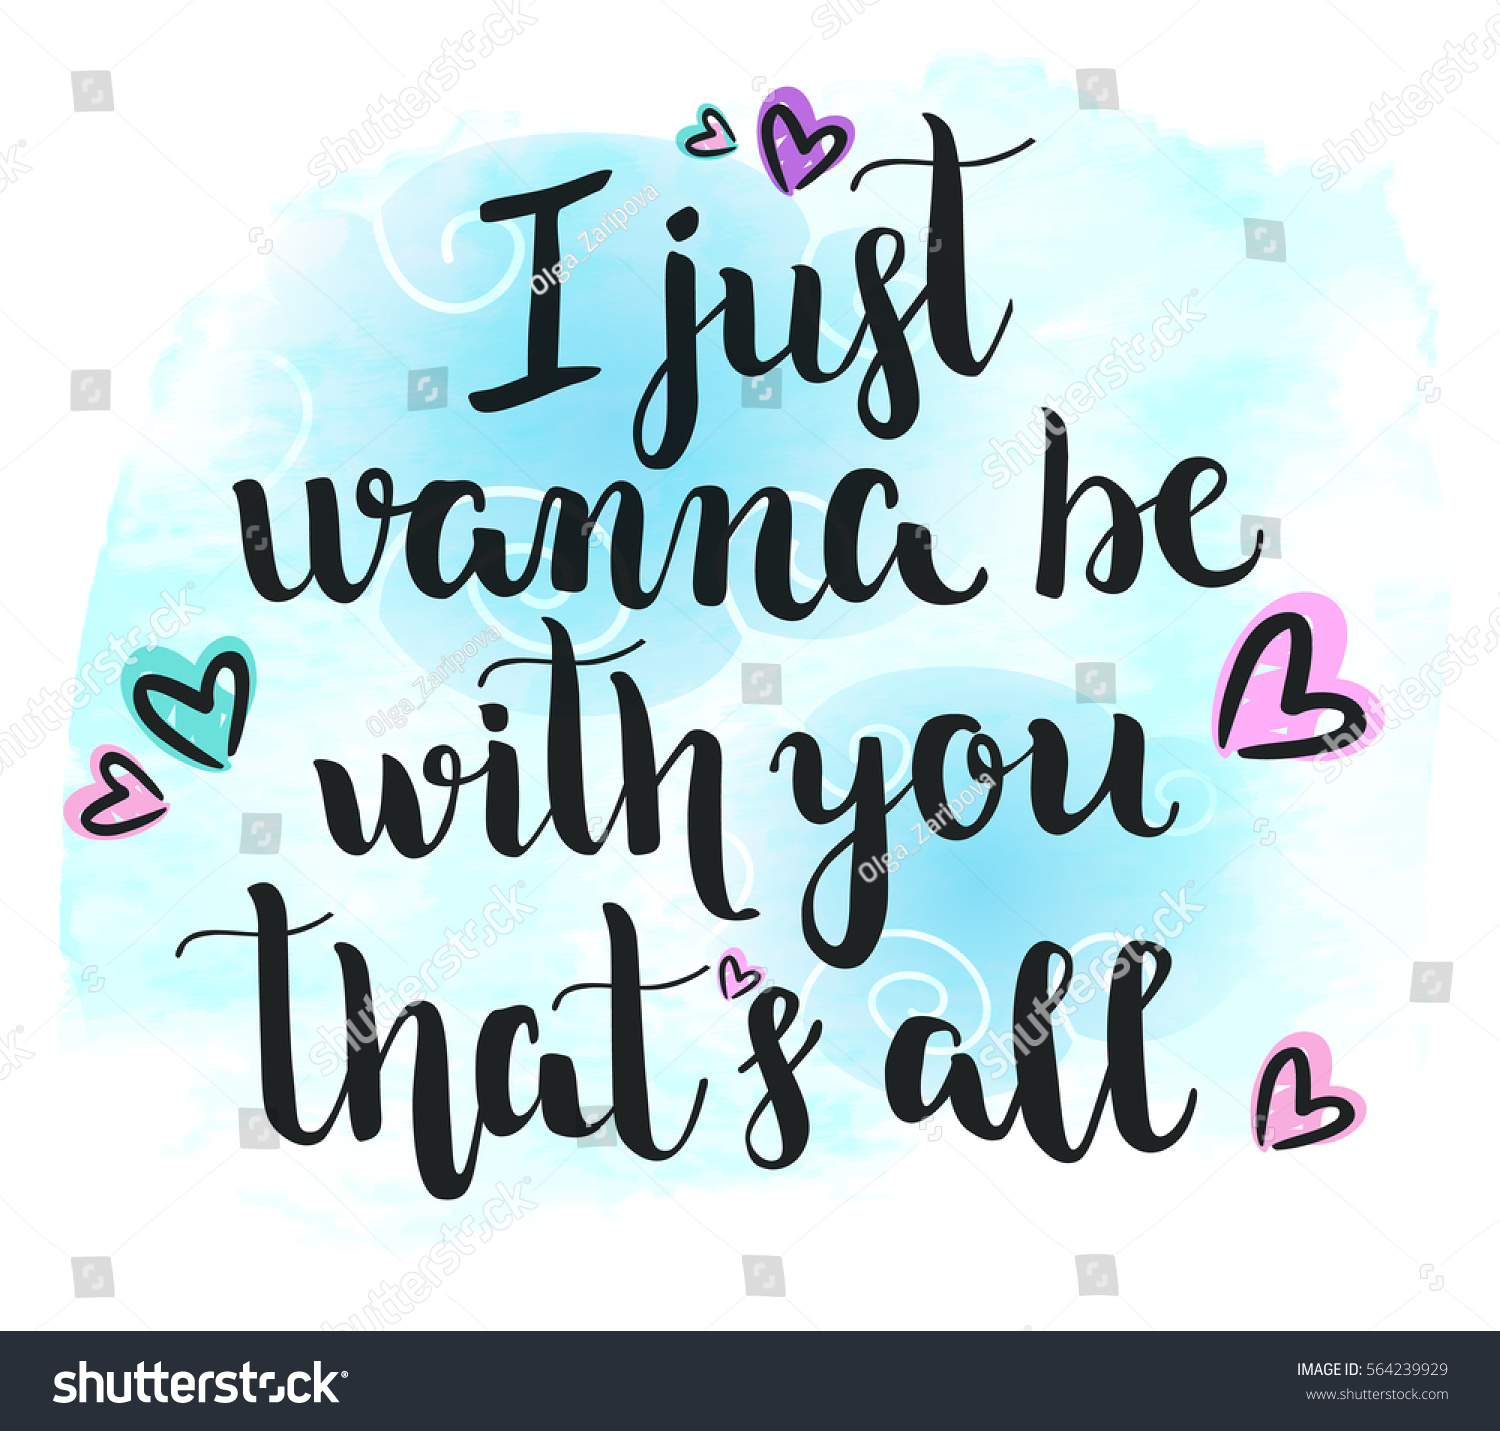 Just Wanna Be You Thats All Stock Vector Royalty Free